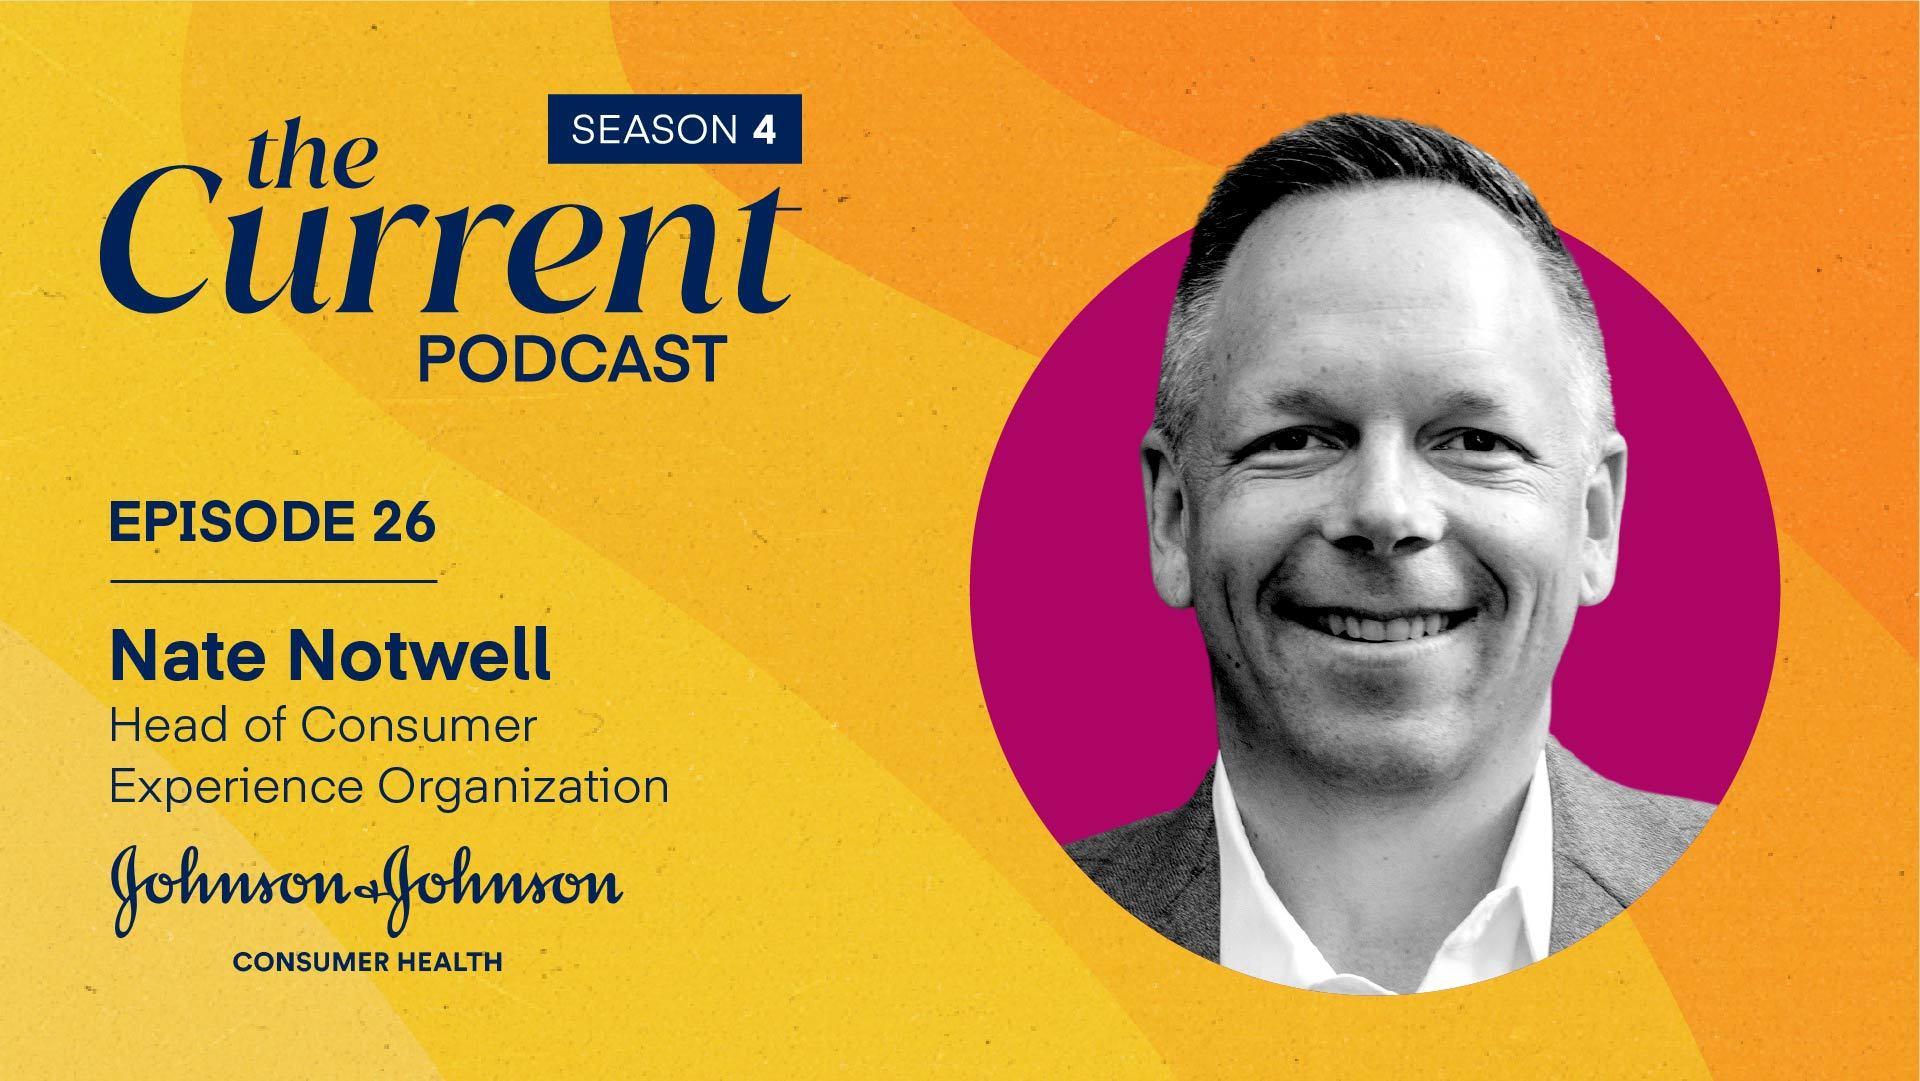 The Current Podcast, Episode 26: Nate Notwell, Head of Consumer Experience Organization, Johnson & Johnson Consumer Health